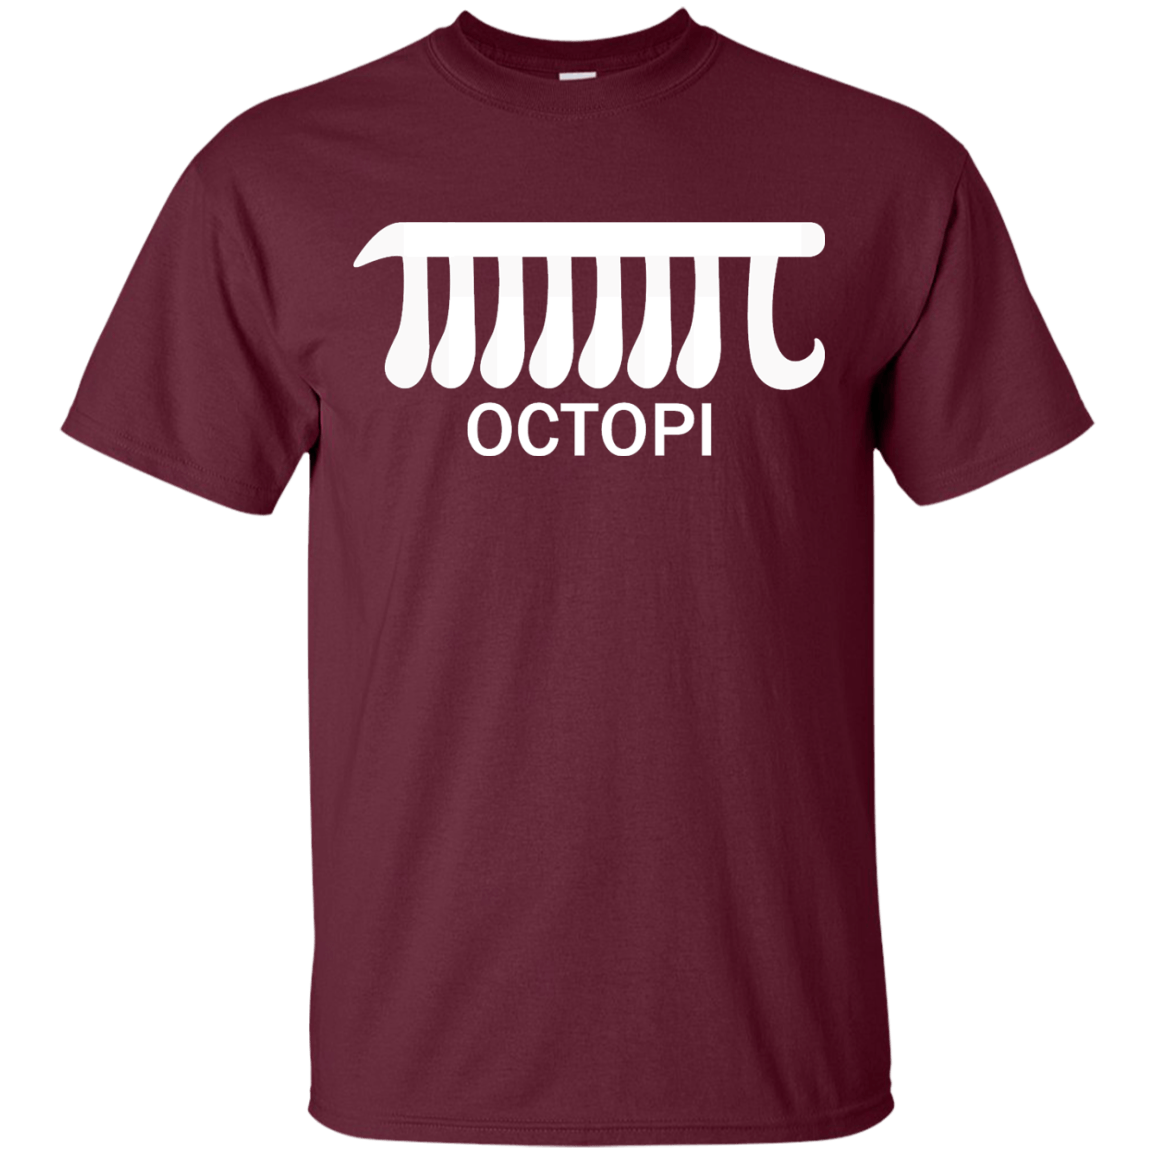 Octopi - Engineering Outfitters